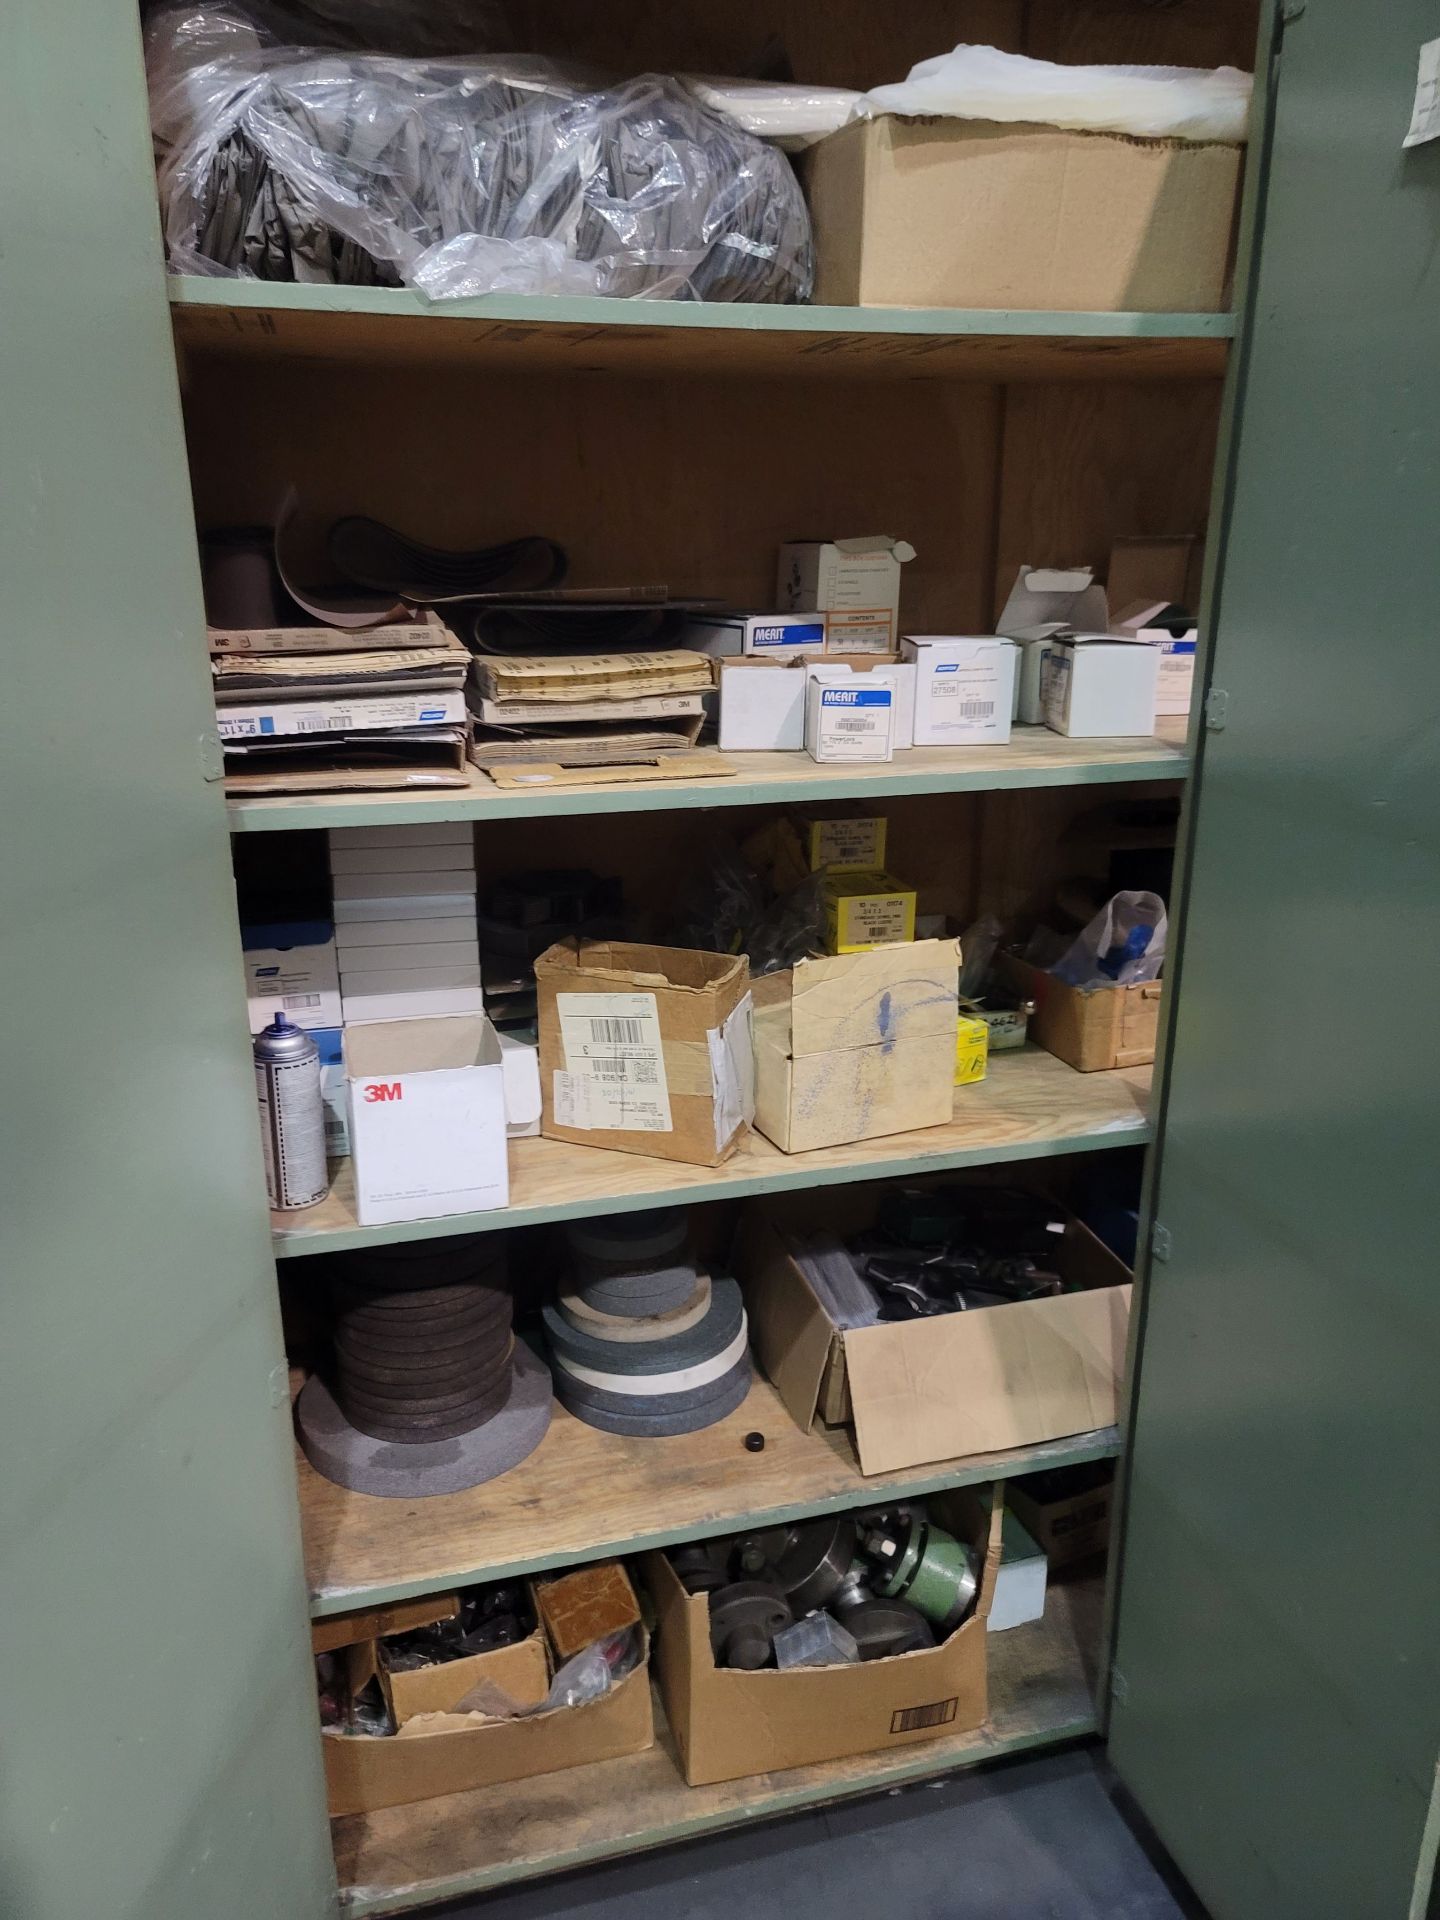 LOT - CONTENTS ONLY OF CABINET, TO INCLUDE: SAFETY SLEEVES, SANDPAPER, ABRASIVES, HARDWARE, GRINDING